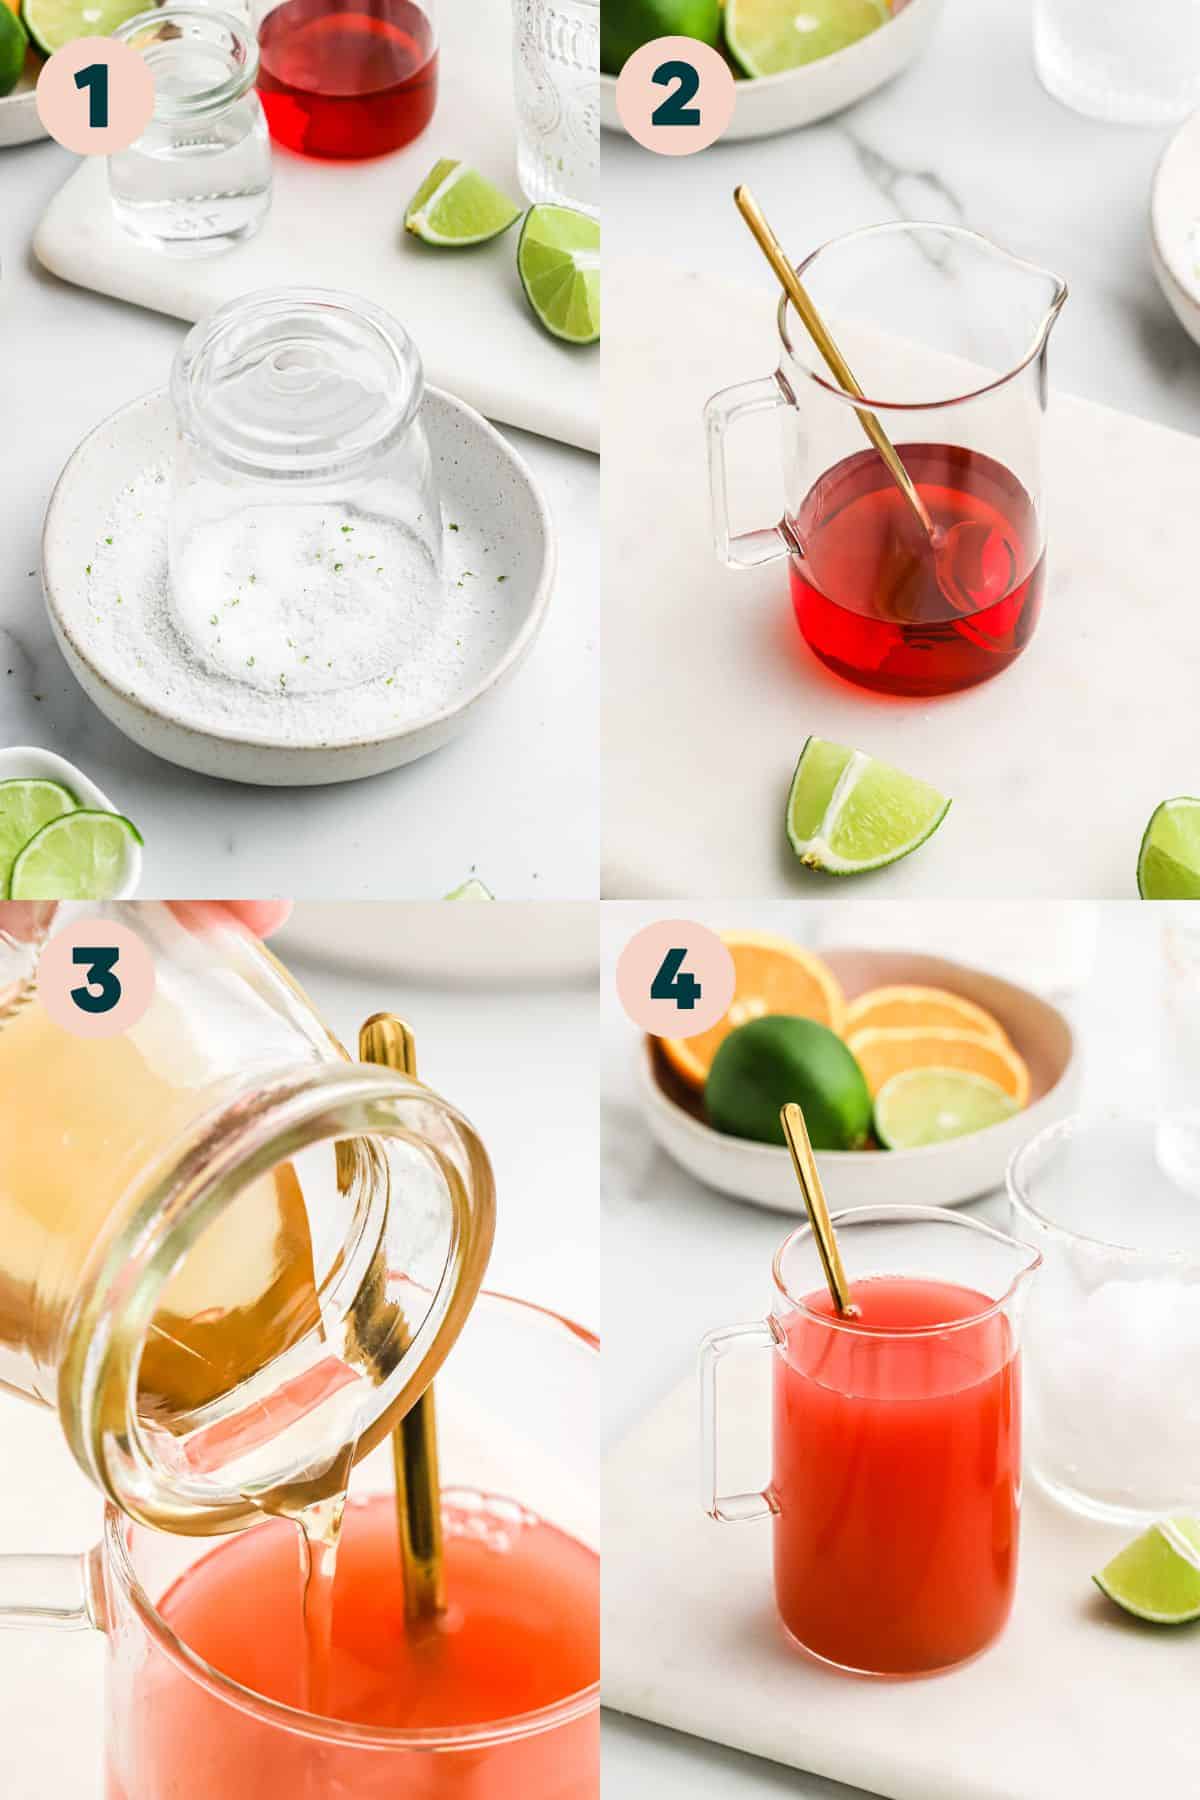 How to Make a Hibiscus Margarita Step by Step.